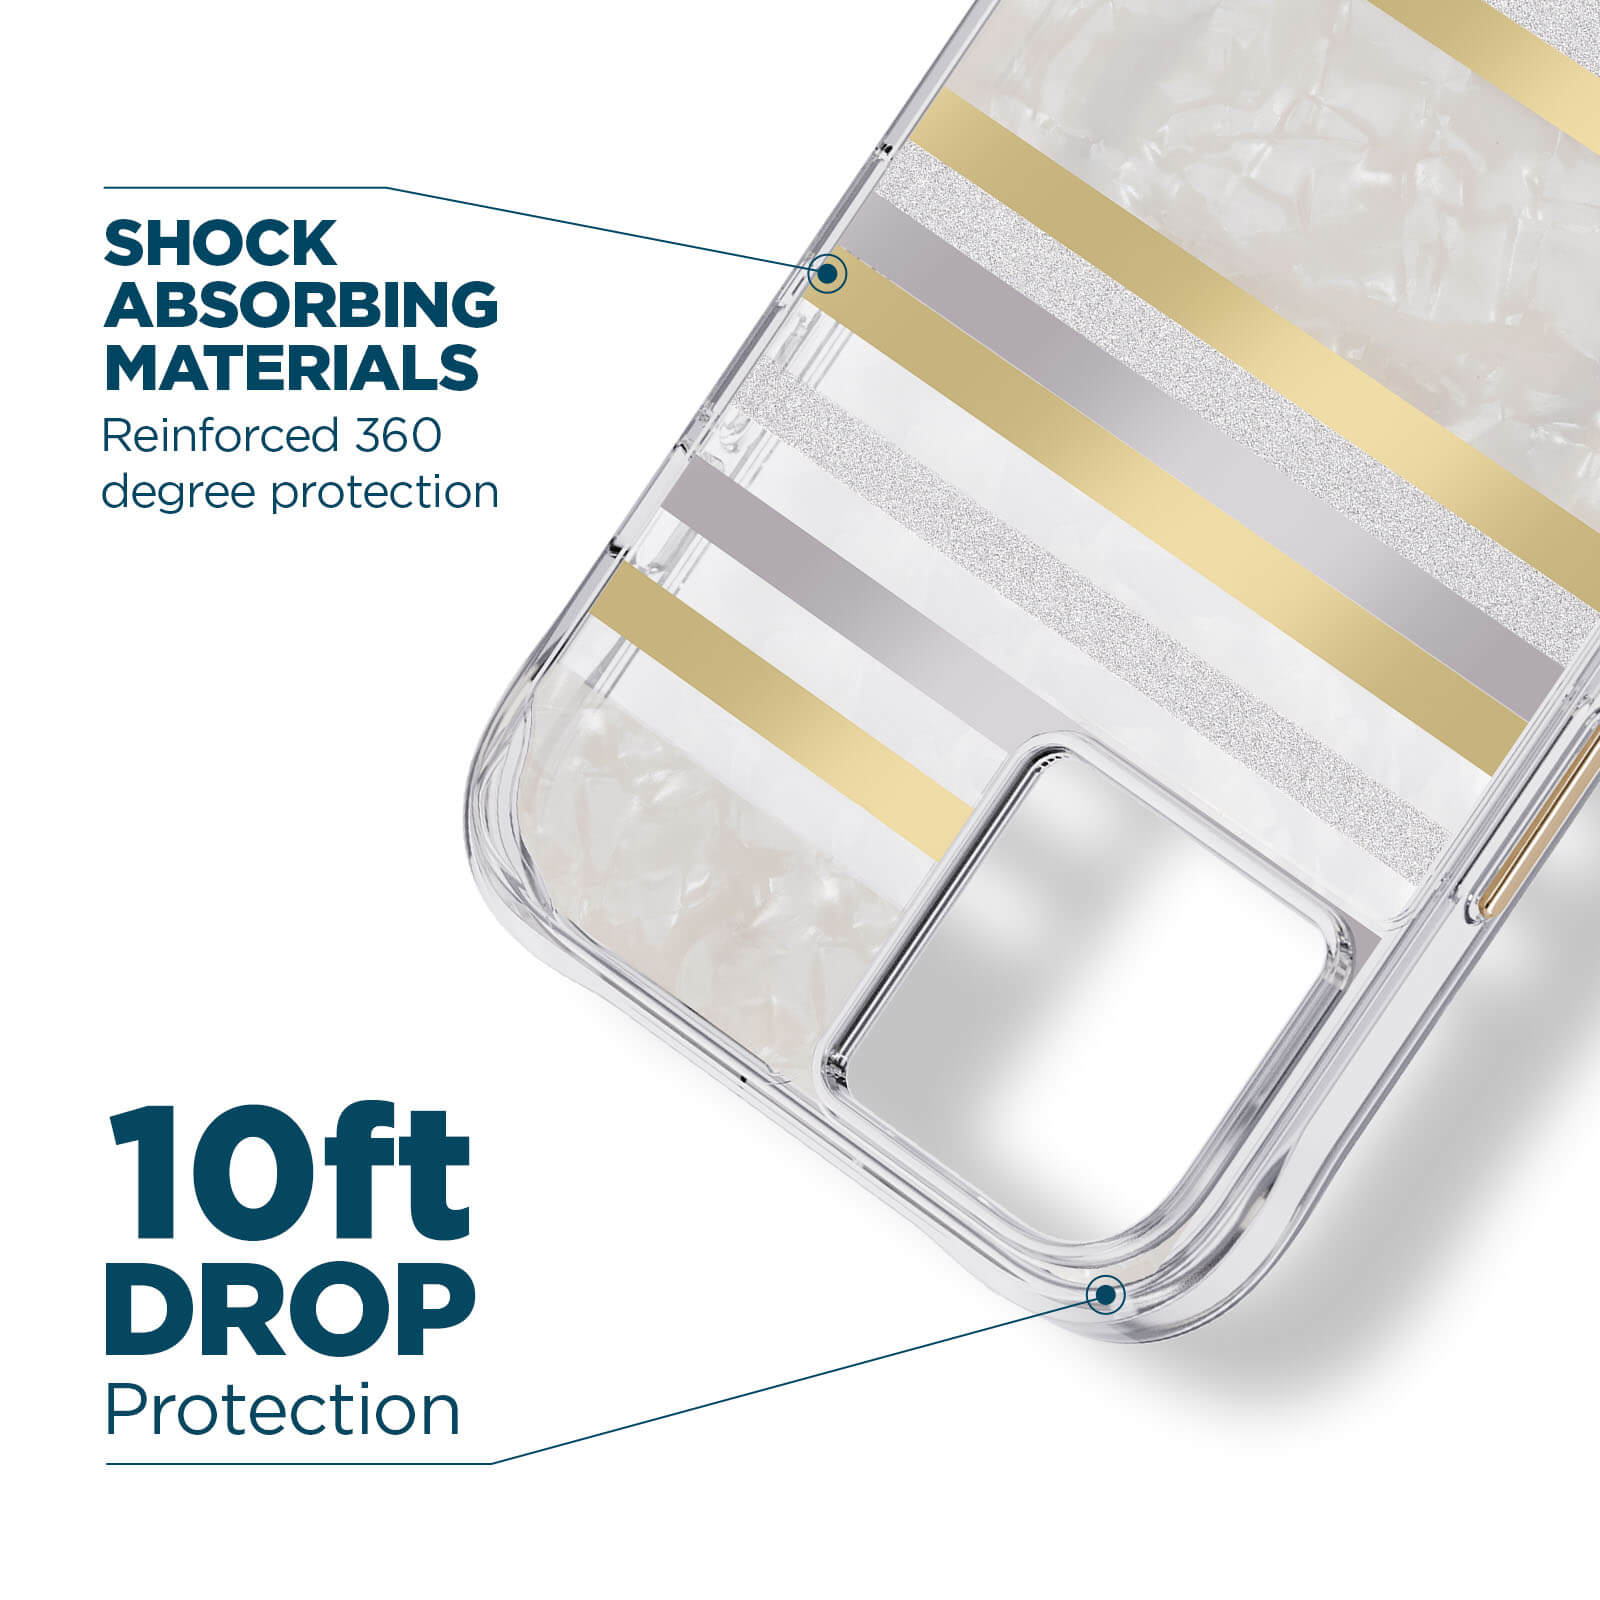 Shock absorbing materials. Reinforced 360 degree protection. 10ft drop protection. color::pearl